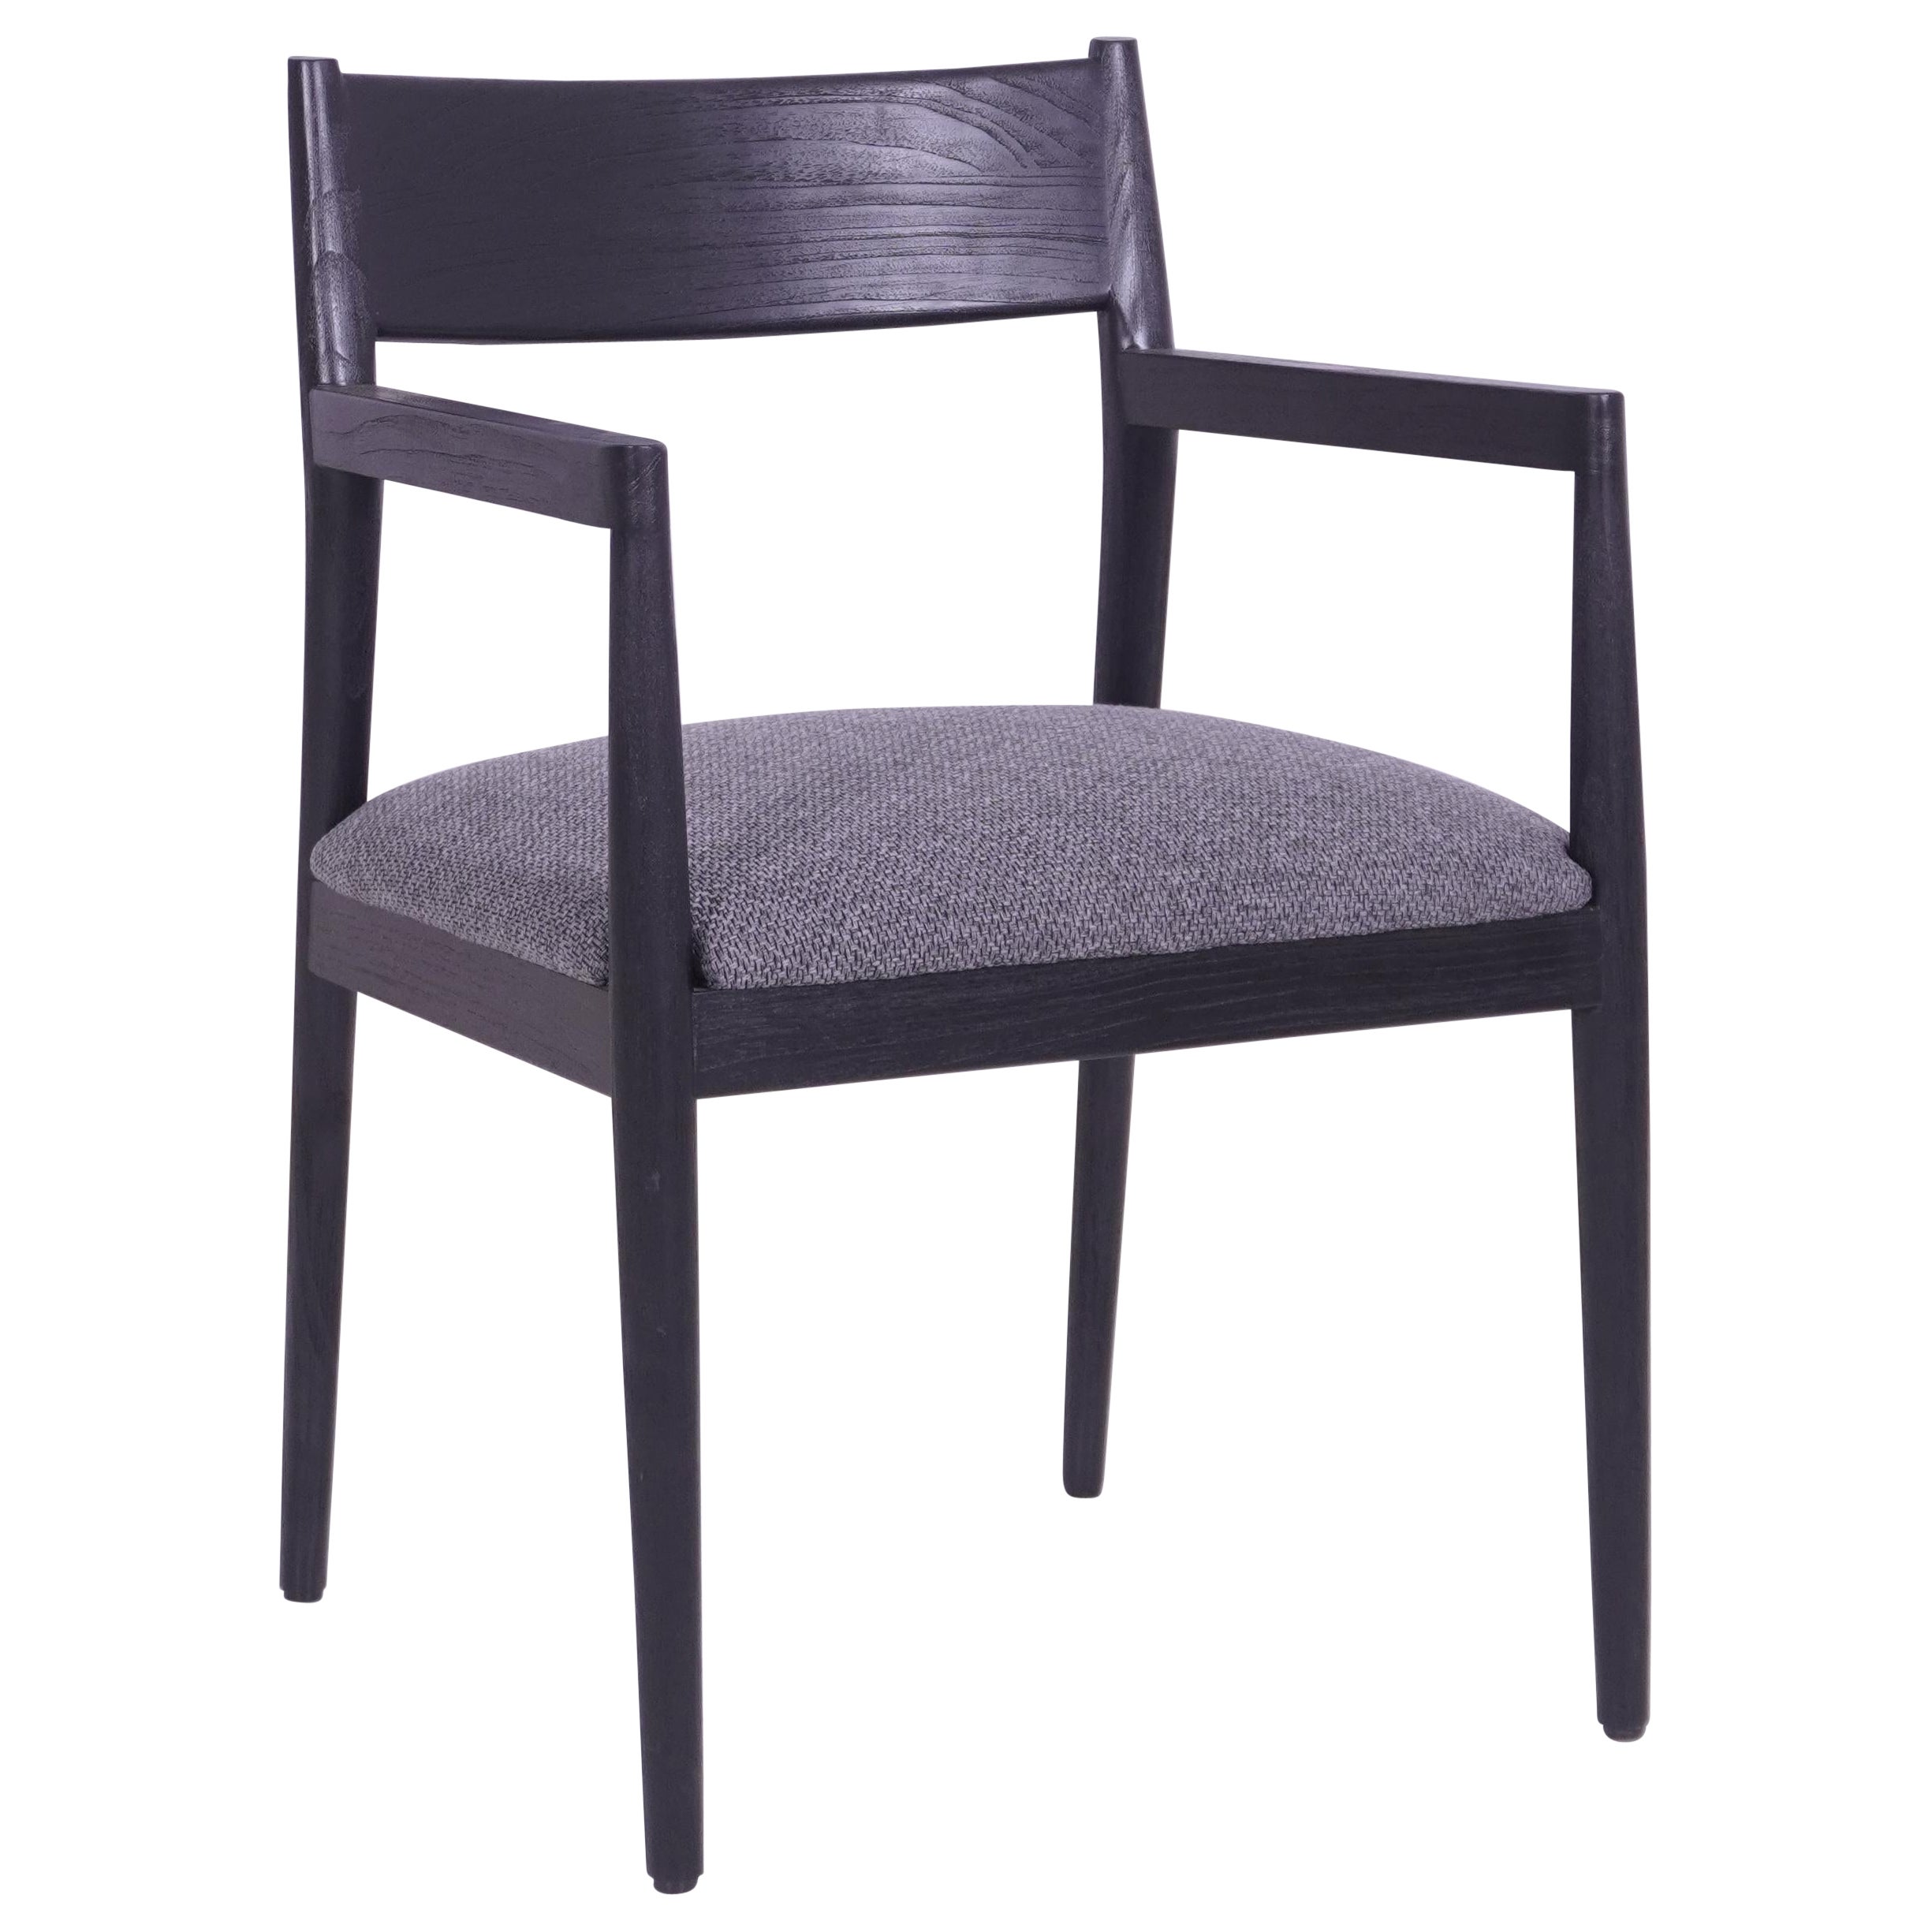 Harper Dining Chair Armchair, Teak Wood in a Black Finish. Set of 6 chairs For Sale